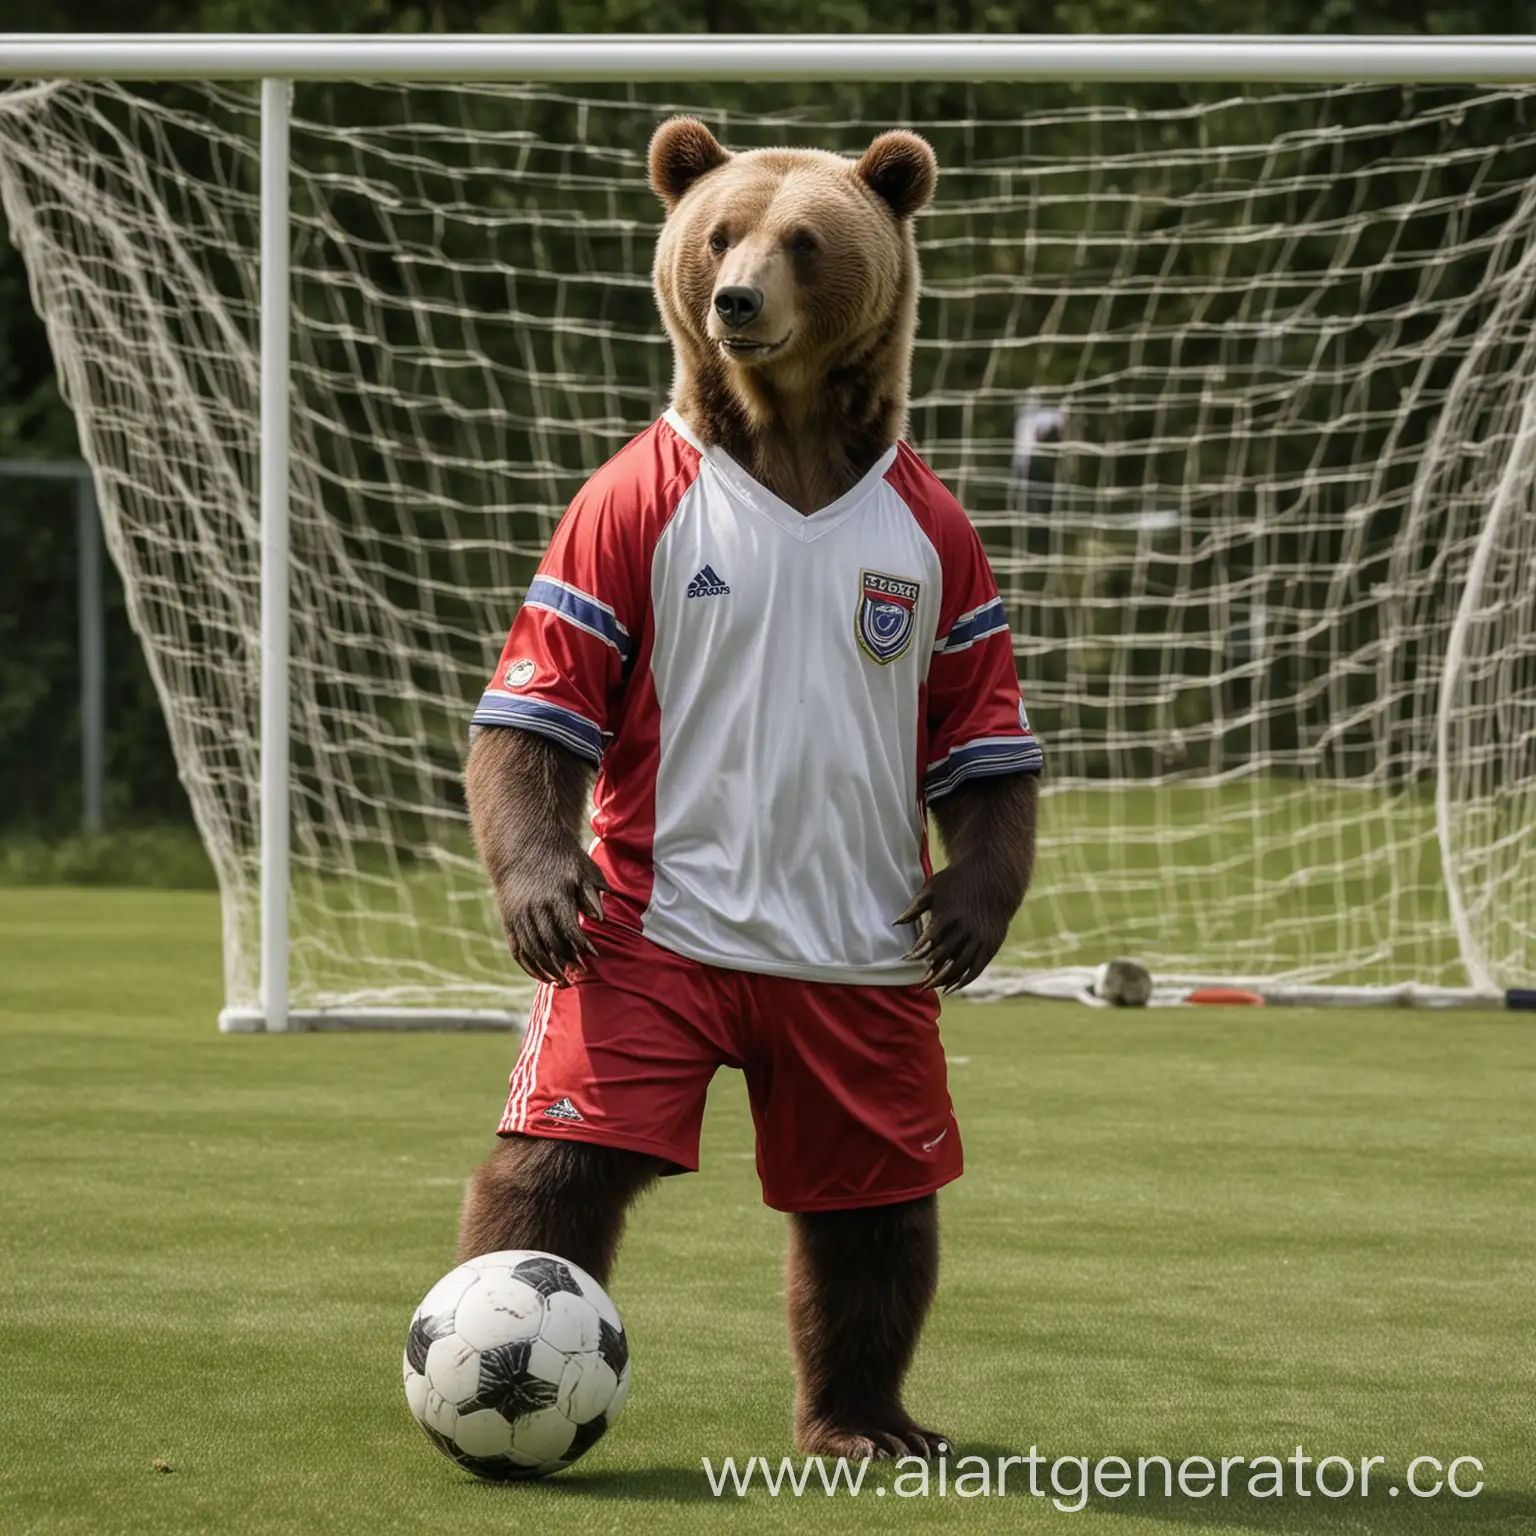 Bear-Playing-Soccer-in-Uniform-at-Soccer-Goals